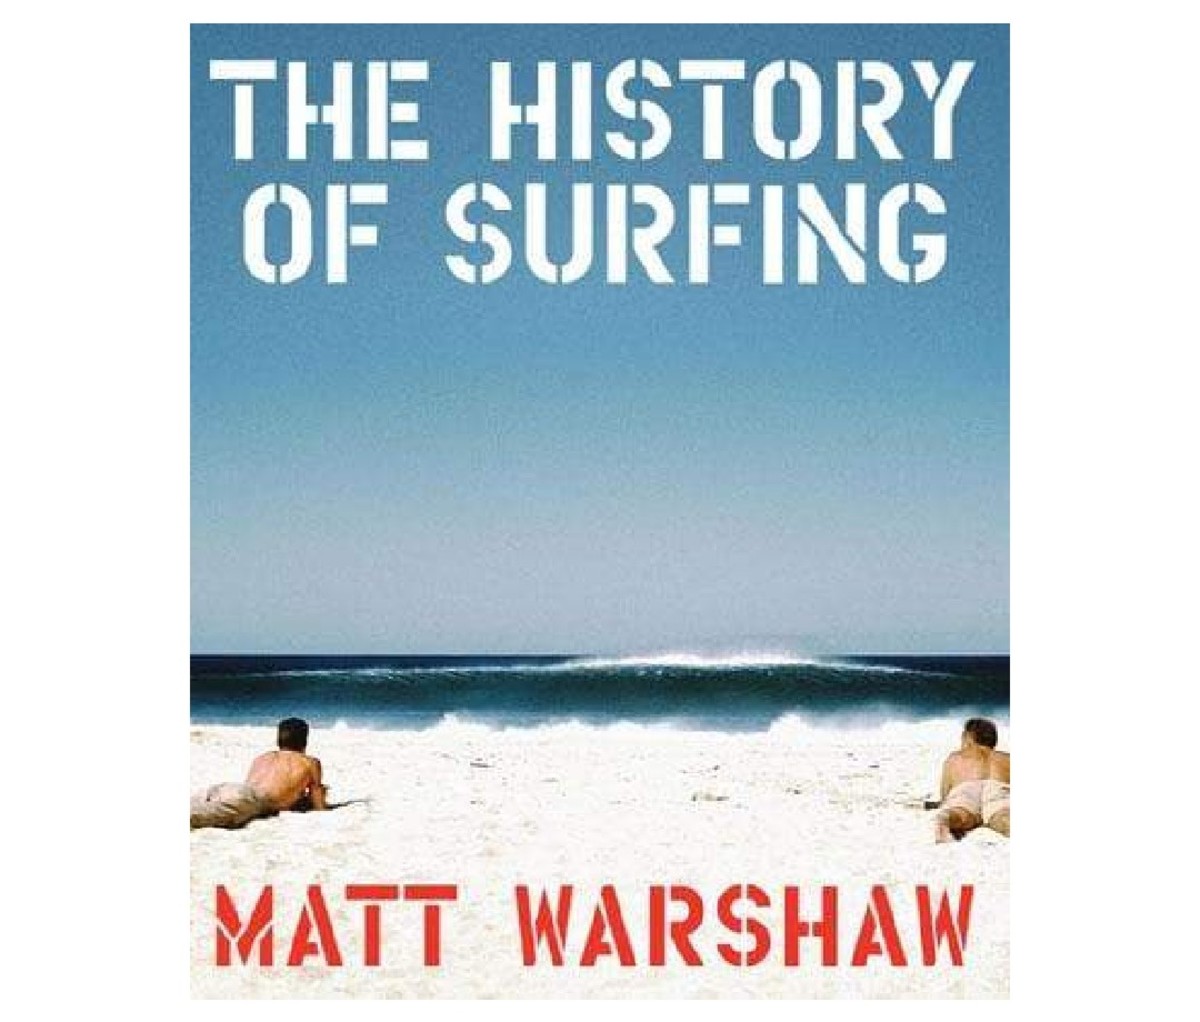 The History of Surfing by Matt Warshaw